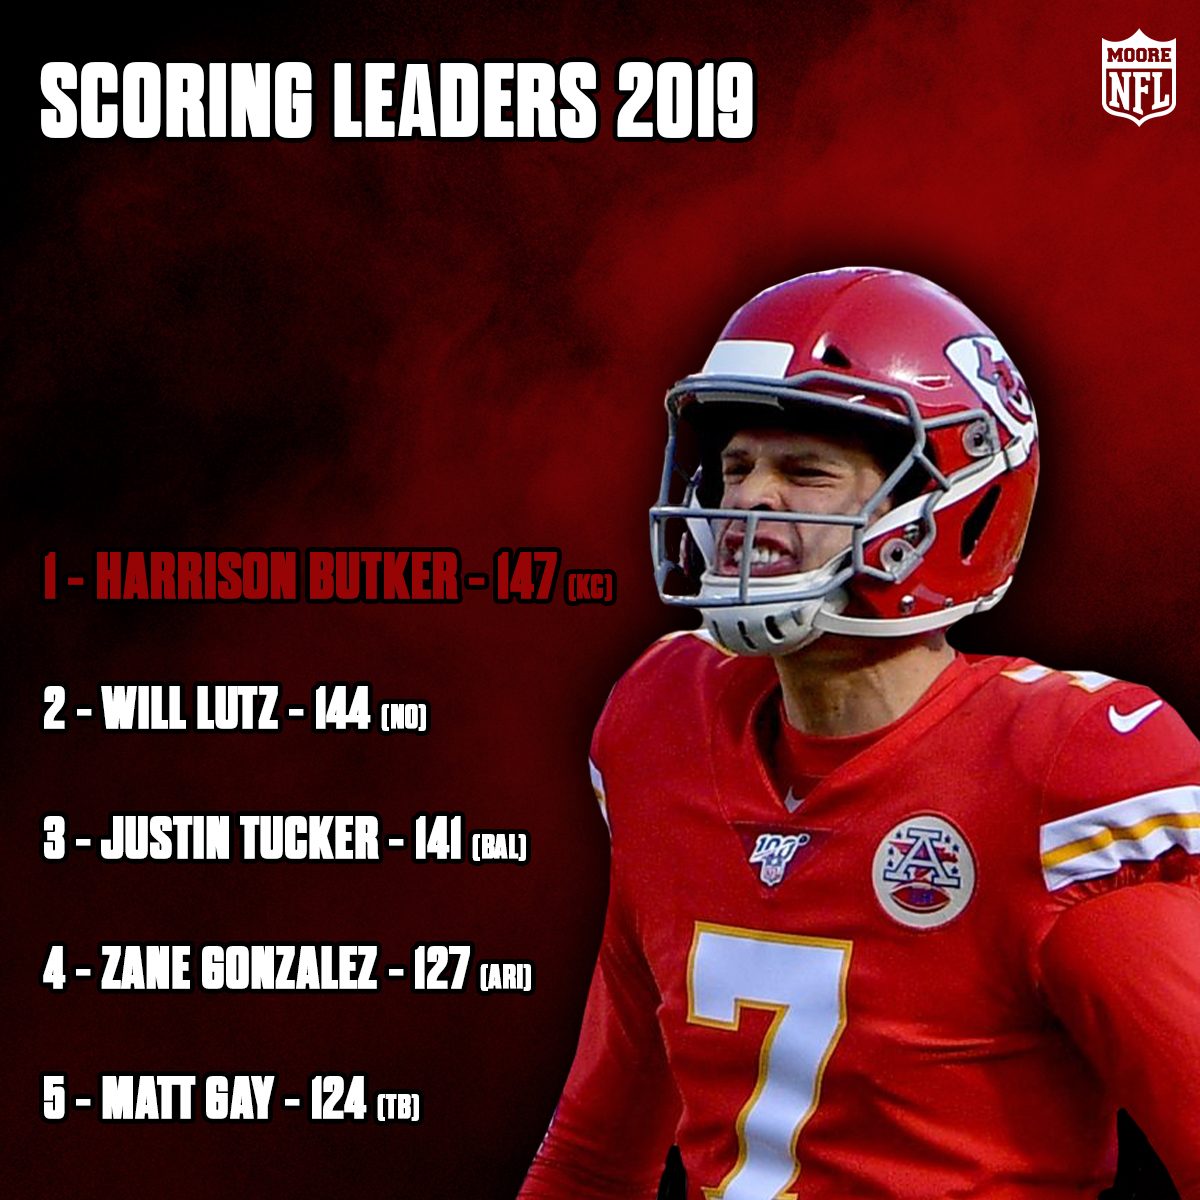 Harrison Butker was money in 2019, will he be as clutch in 2020 and stay on top? 💰

#nfl #nfldraft #nflnews #nflupdates #nfluk #nfldiscussion #nflfreeagency #nflhighlights #kc #kansascity #kansascitychiefs #chiefs #chiefskingdom